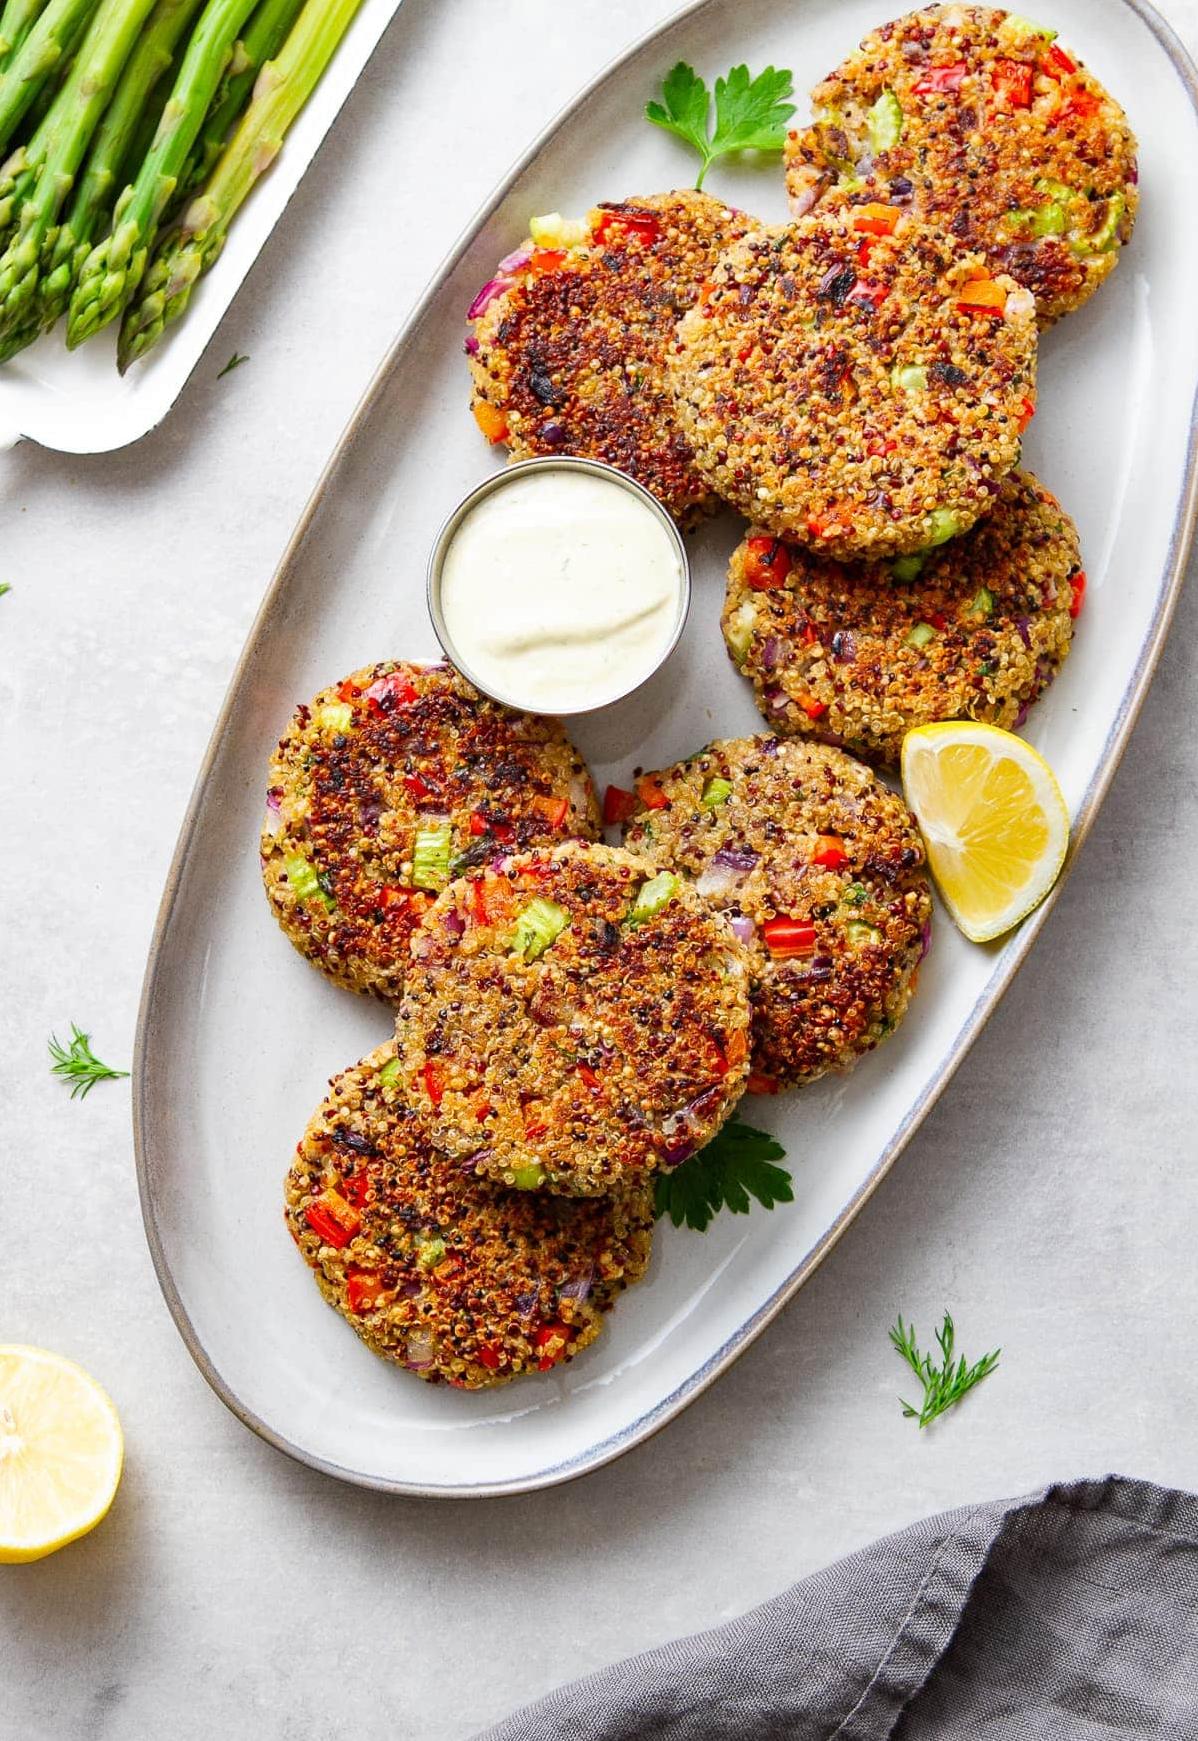 Delicious Falafel Crab Cakes Recipe for Seafood Lovers